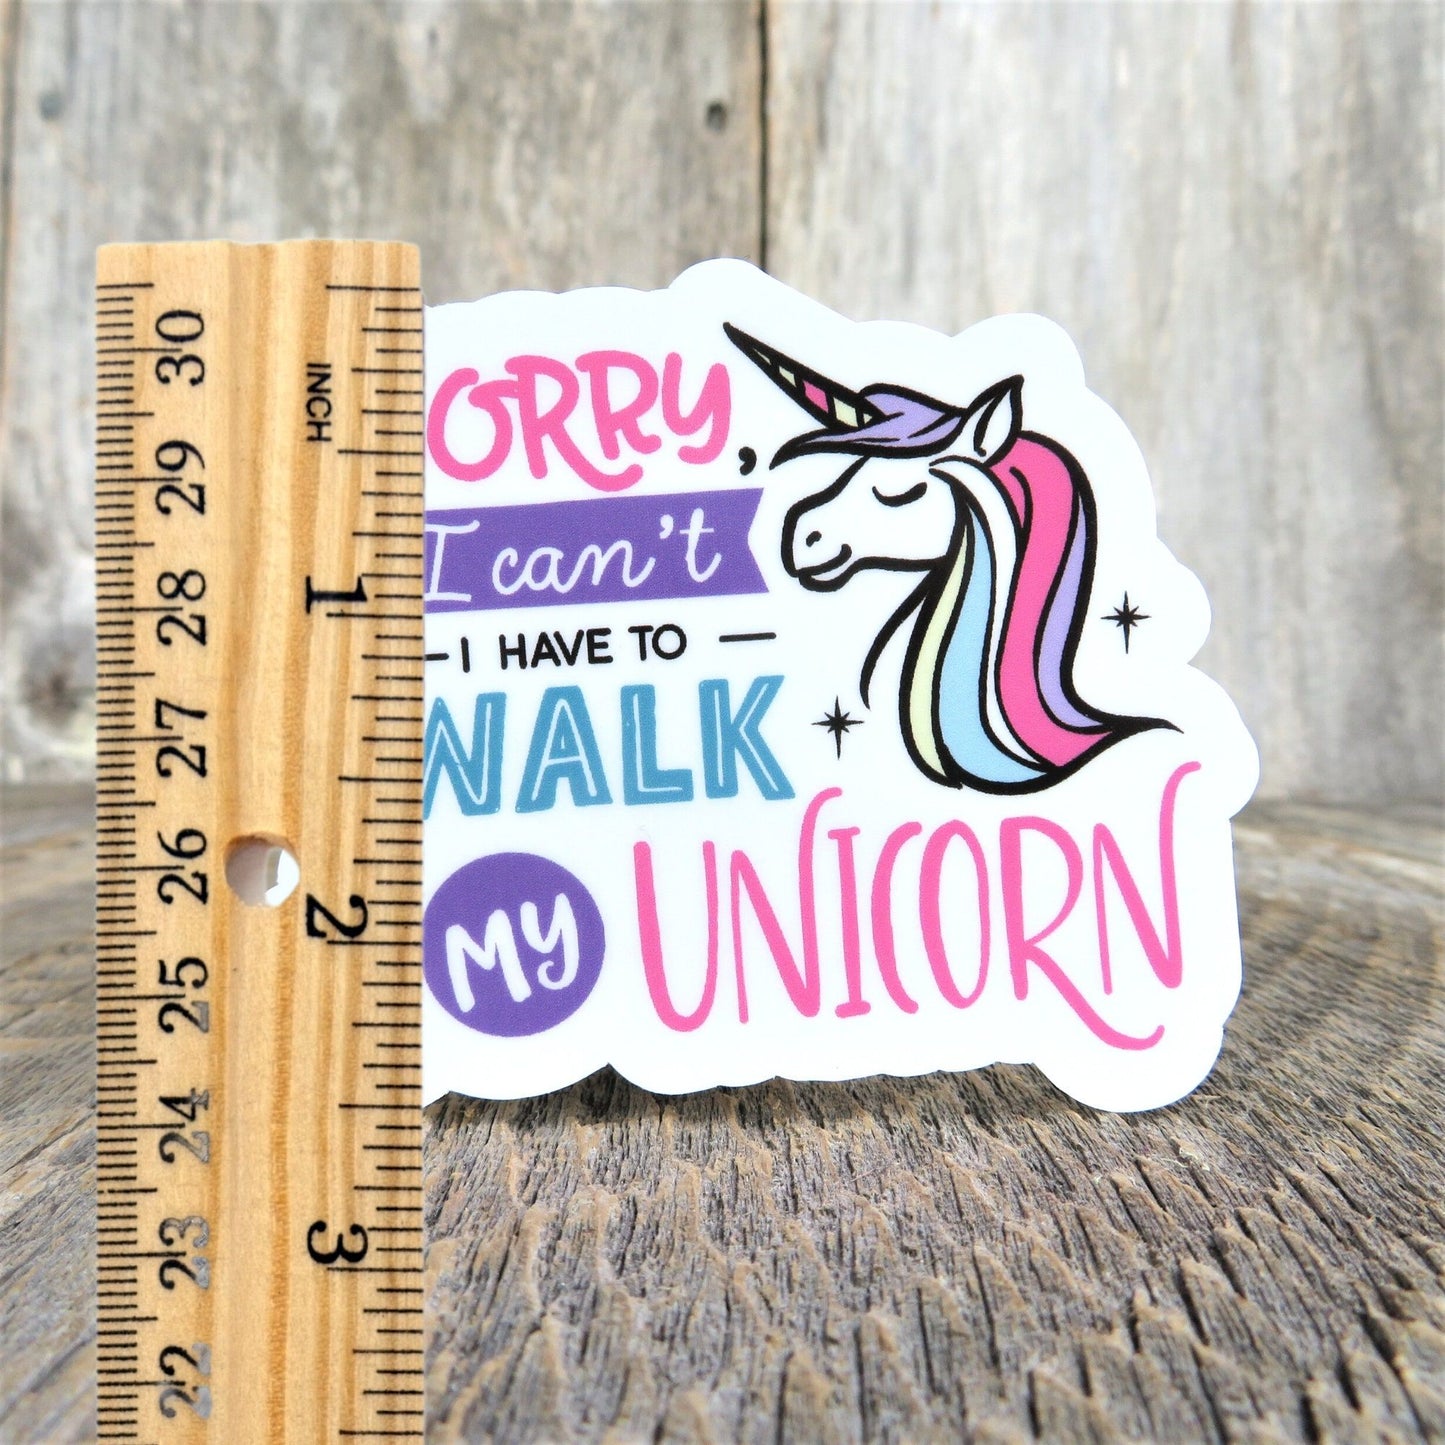 Sorry I Have To Walk My Unicorn Sticker Sarcastic Anti Social Too Busy Positive Saying Waterproof Laptop Sticker